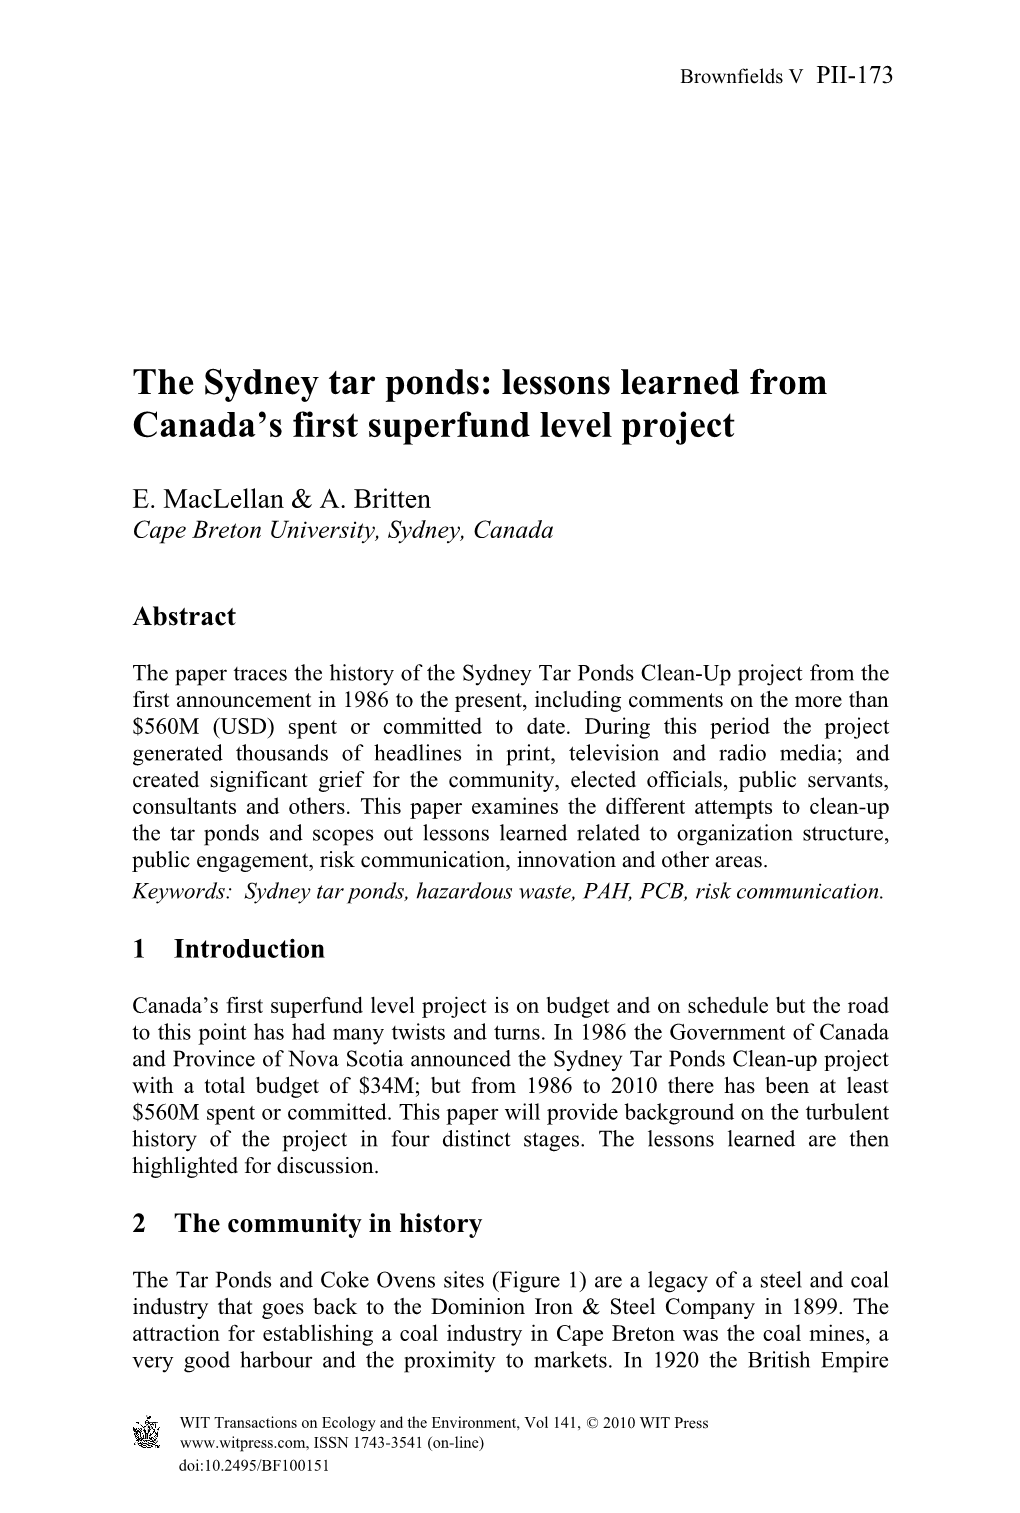 The Sydney Tar Ponds: Lessons Learned from Canada’S First Superfund Level Project